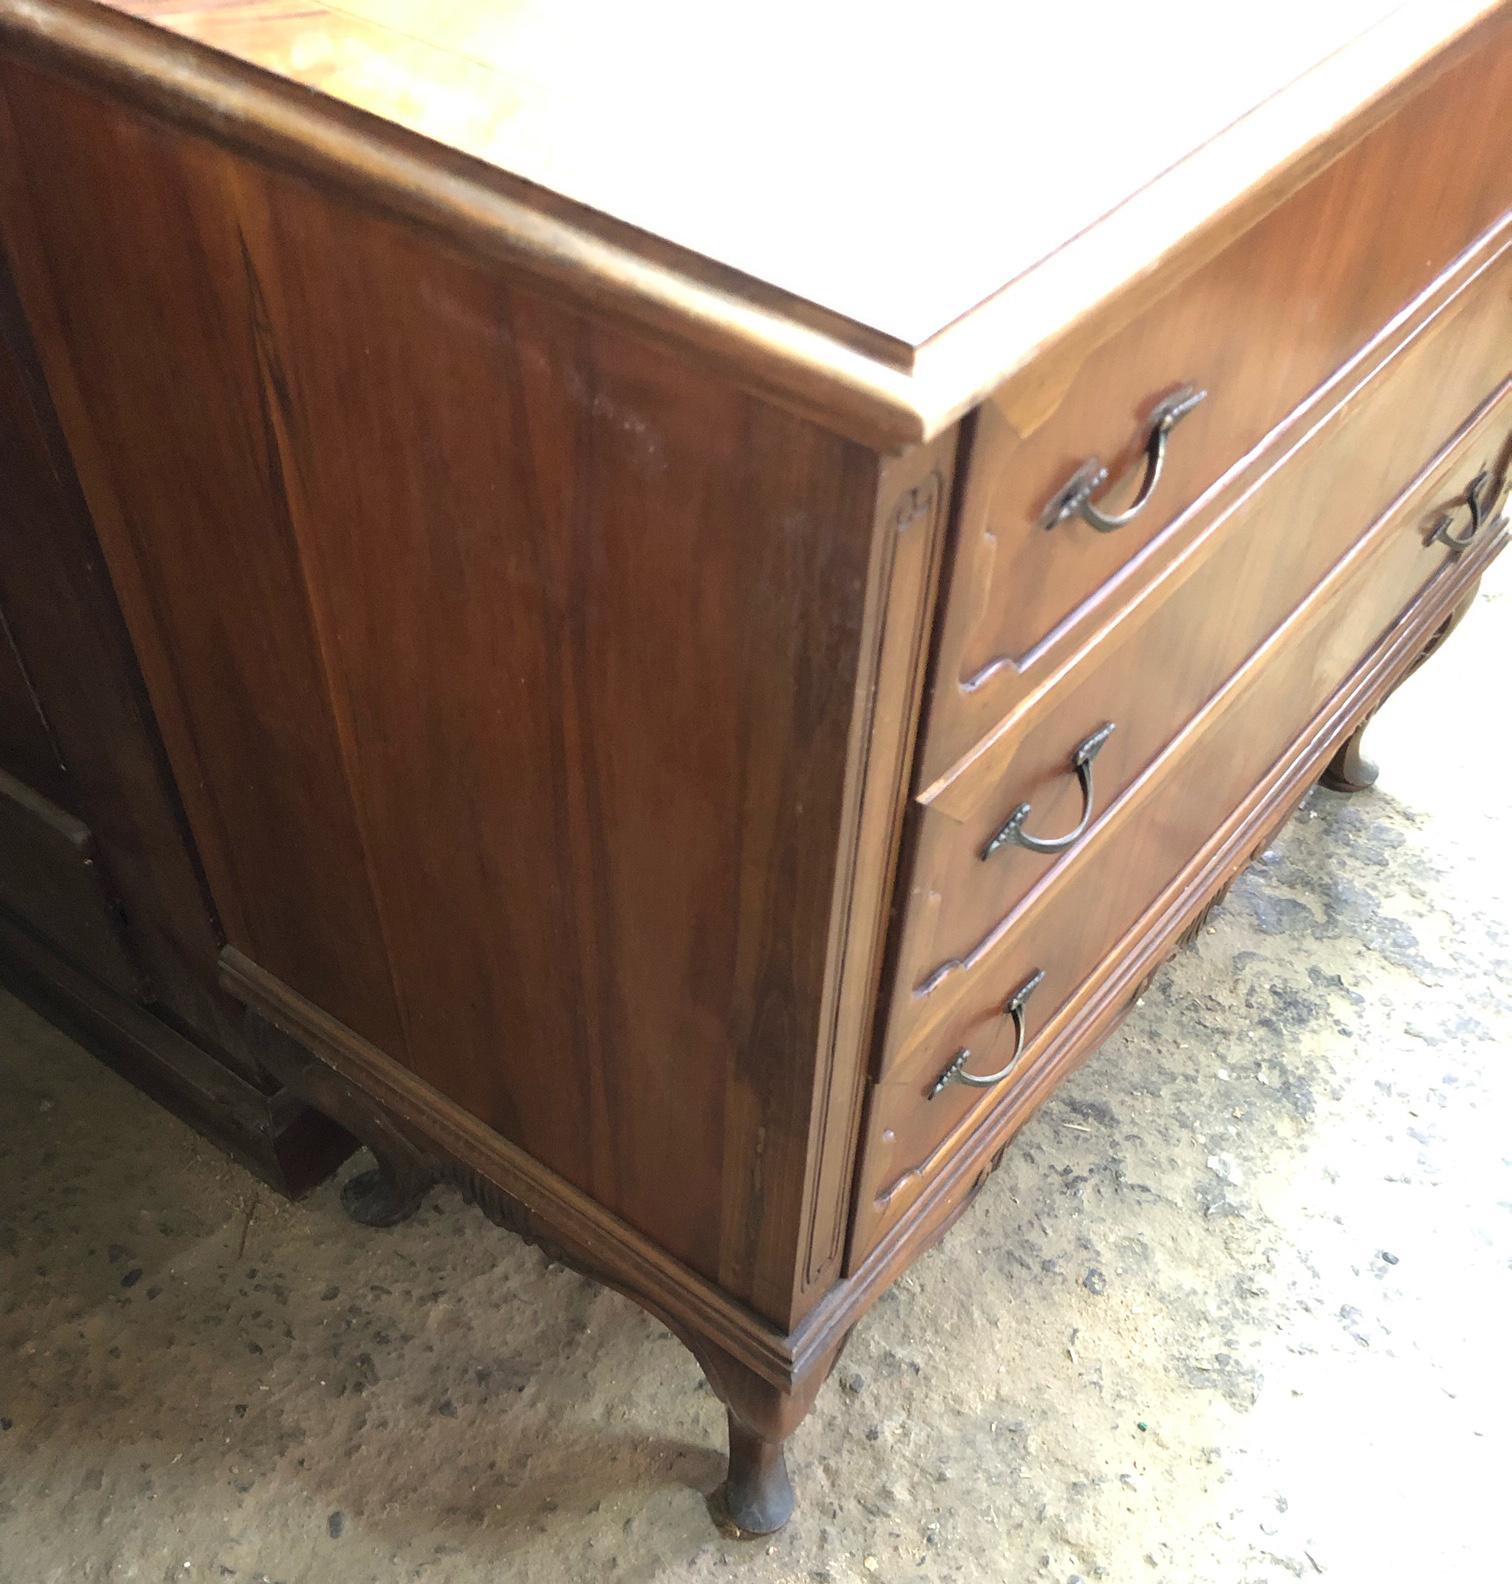 Italian chest of drawers of the twentieth century in natural color walnut with three drawers.
The drawers have quality dovetail joints.
Walnut forms very beautiful handmade designs.
The piece of furniture is particularly elegant.
Comes from an